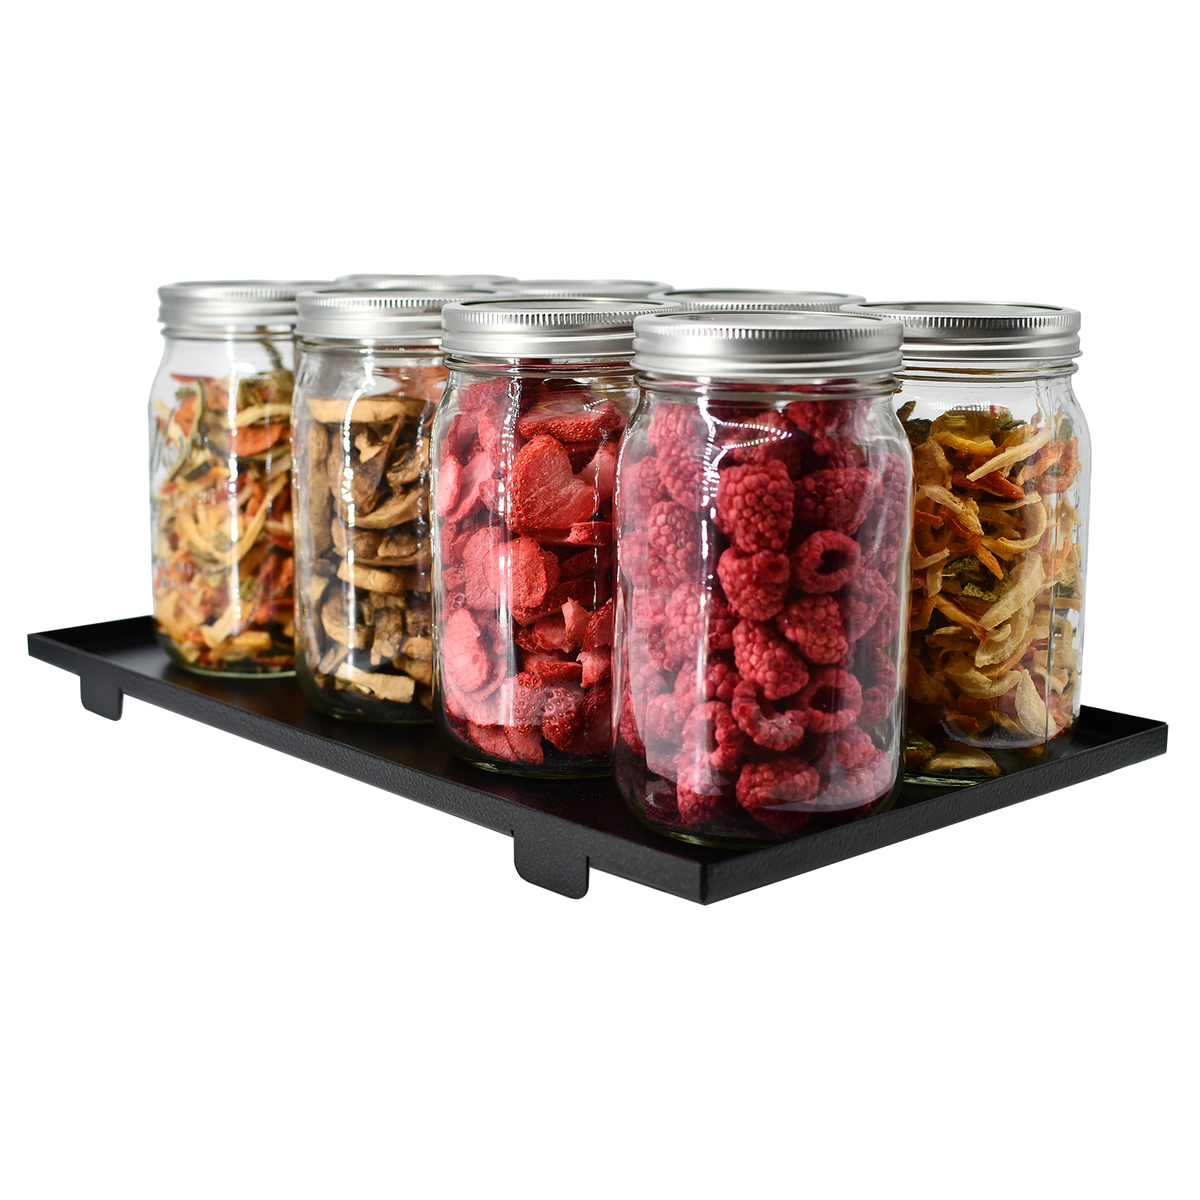 The Cube Freeze Dryer Jar Seal Tray